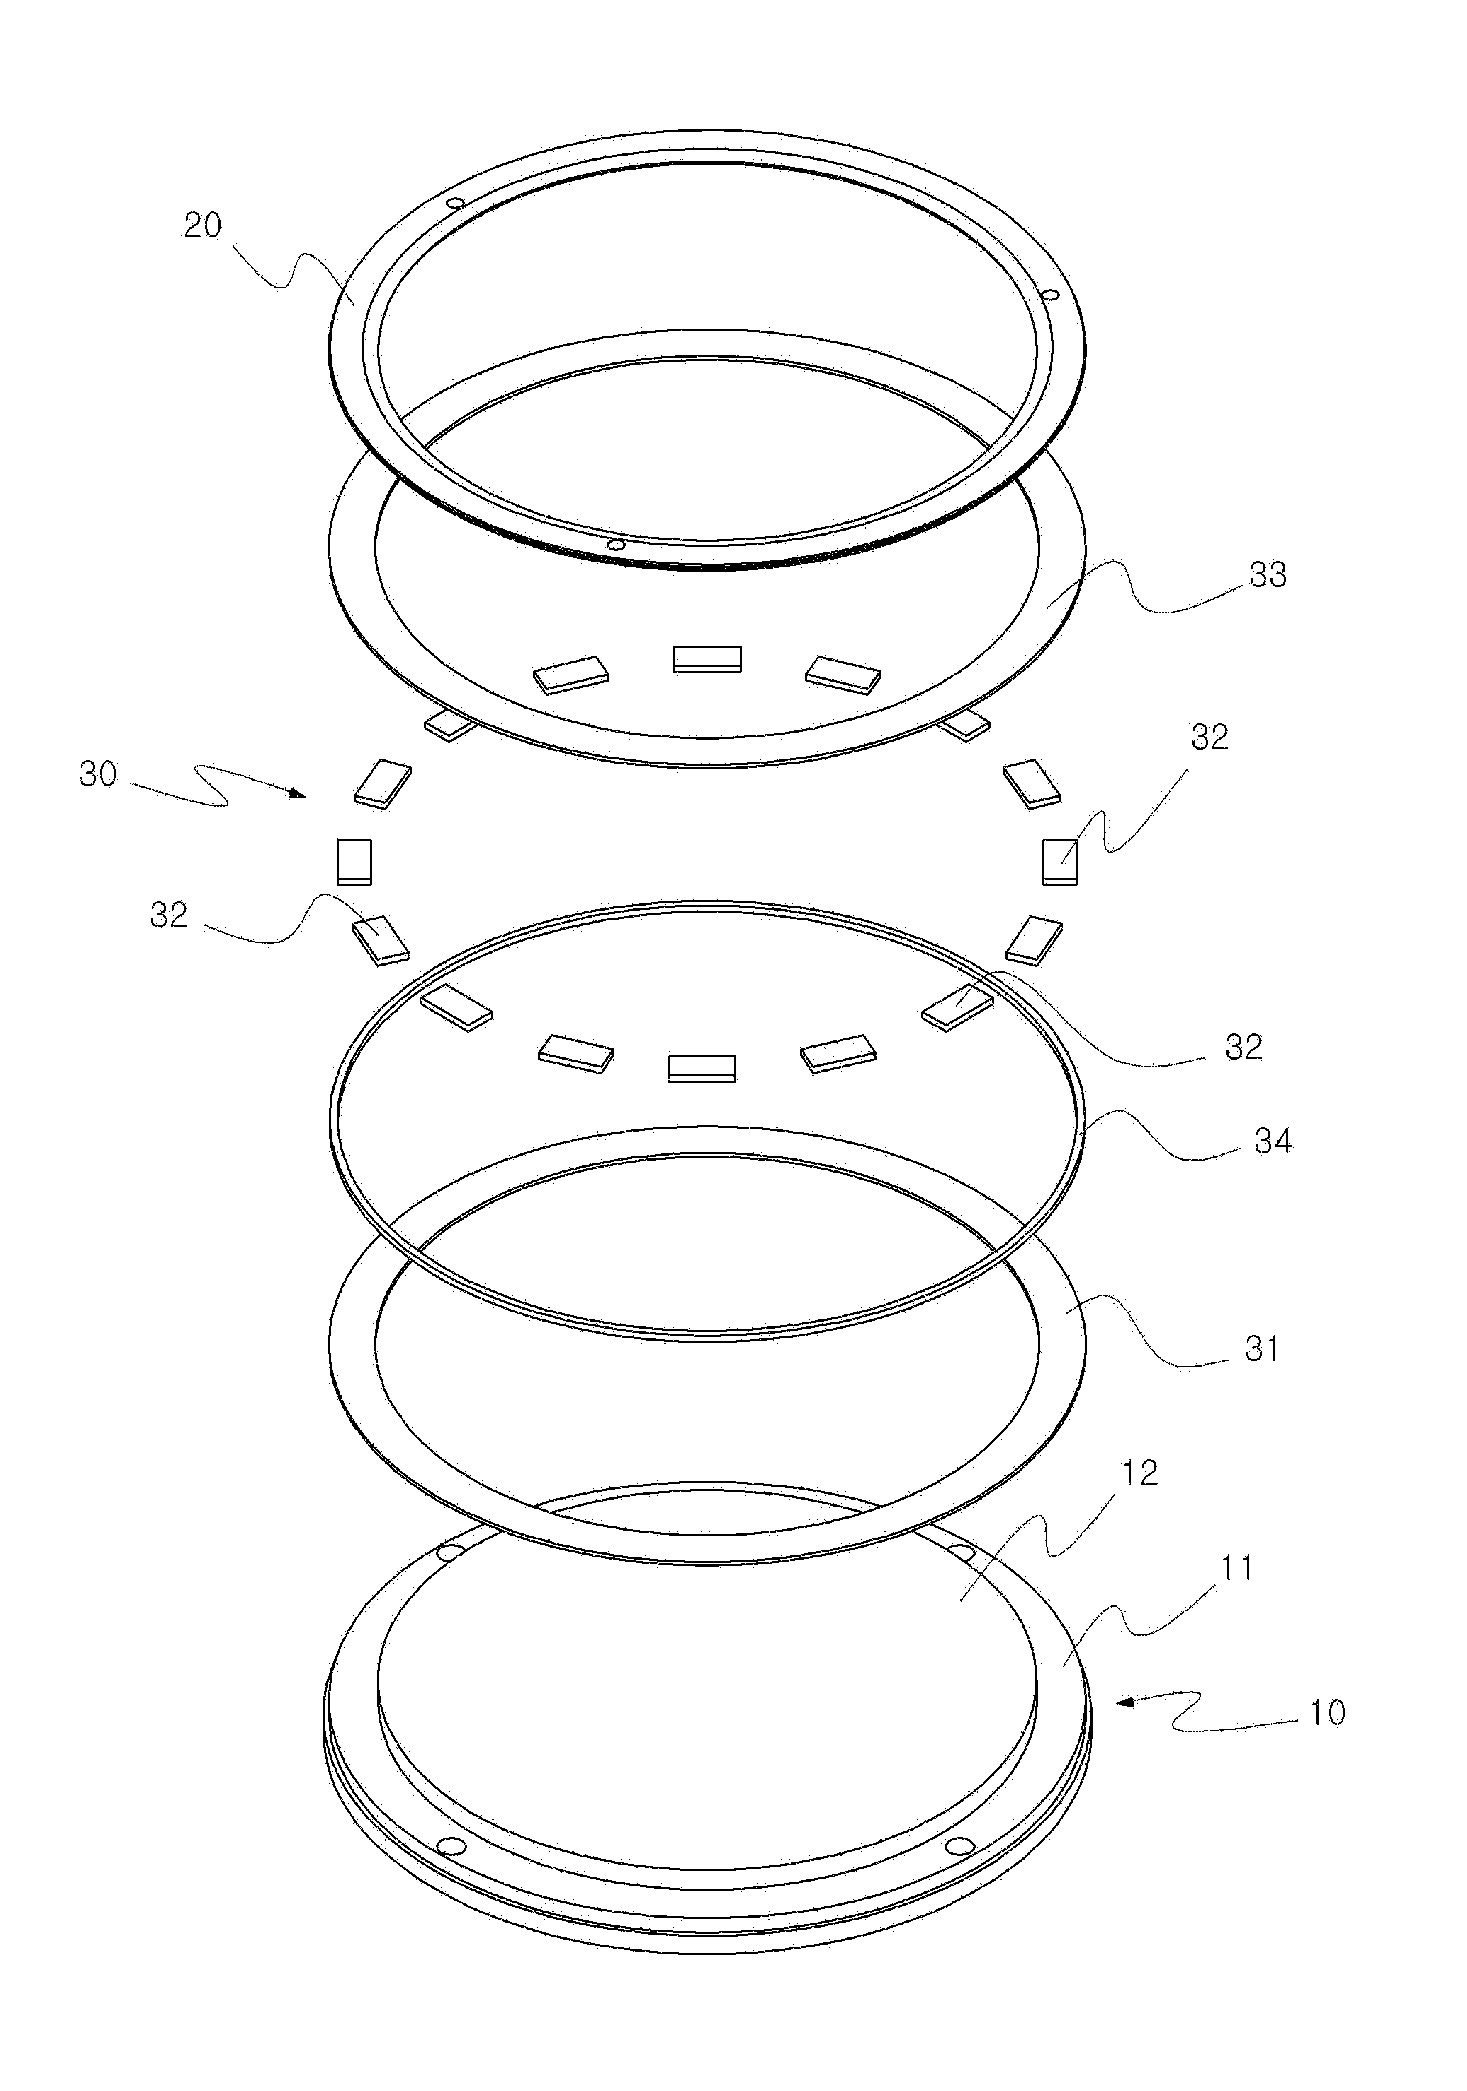 Edge ring cooling module for semi-conductor manufacture chuck